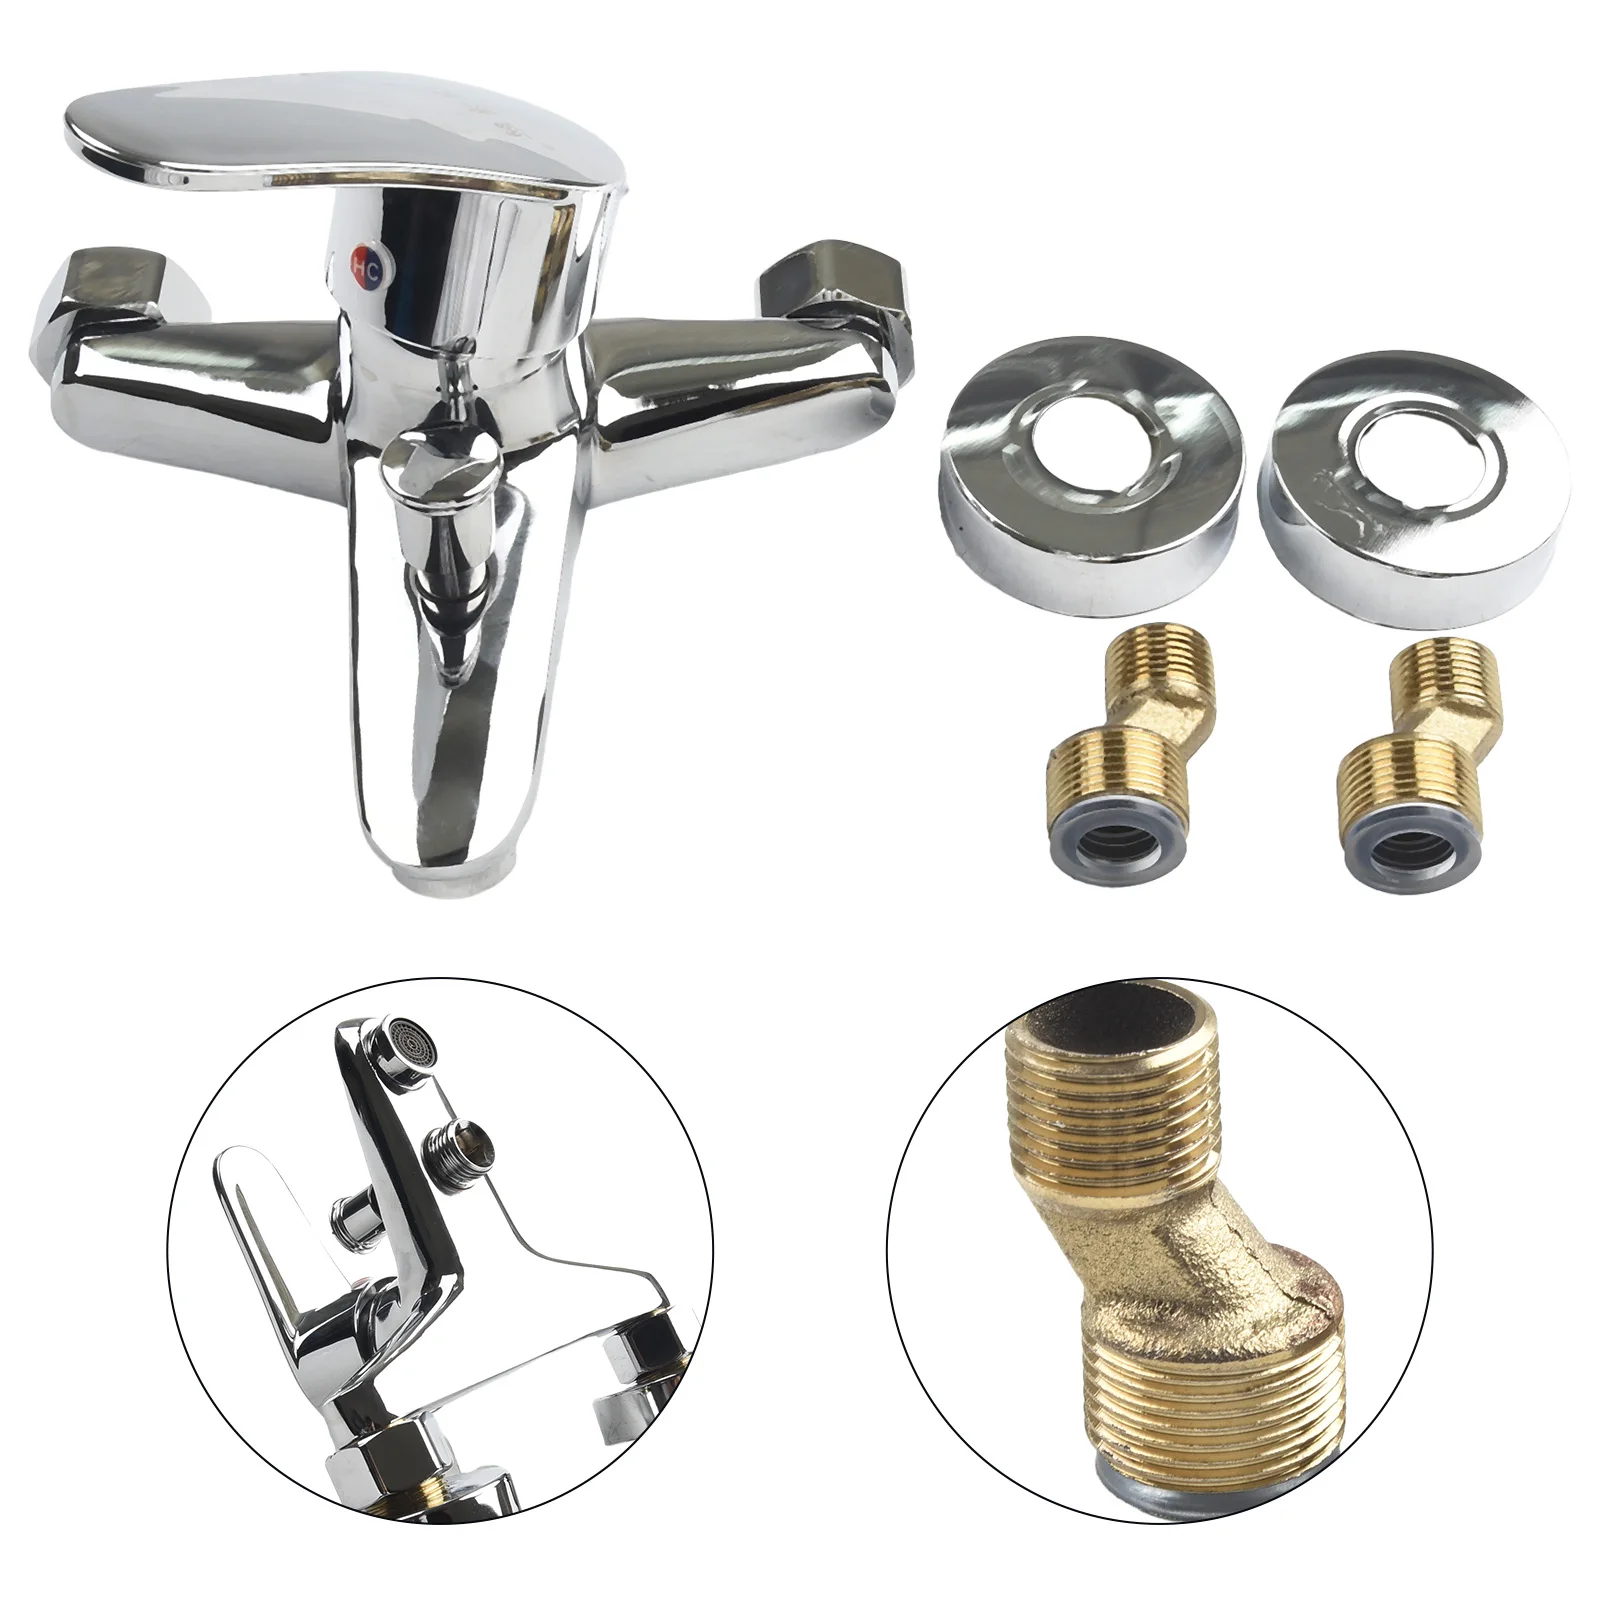 

Bathtub Faucets Chrome Wall Mounted Hot Cold Water Dual Spout Mixer Tap Hot And Cold Mixing Valve Bathtub Faucet